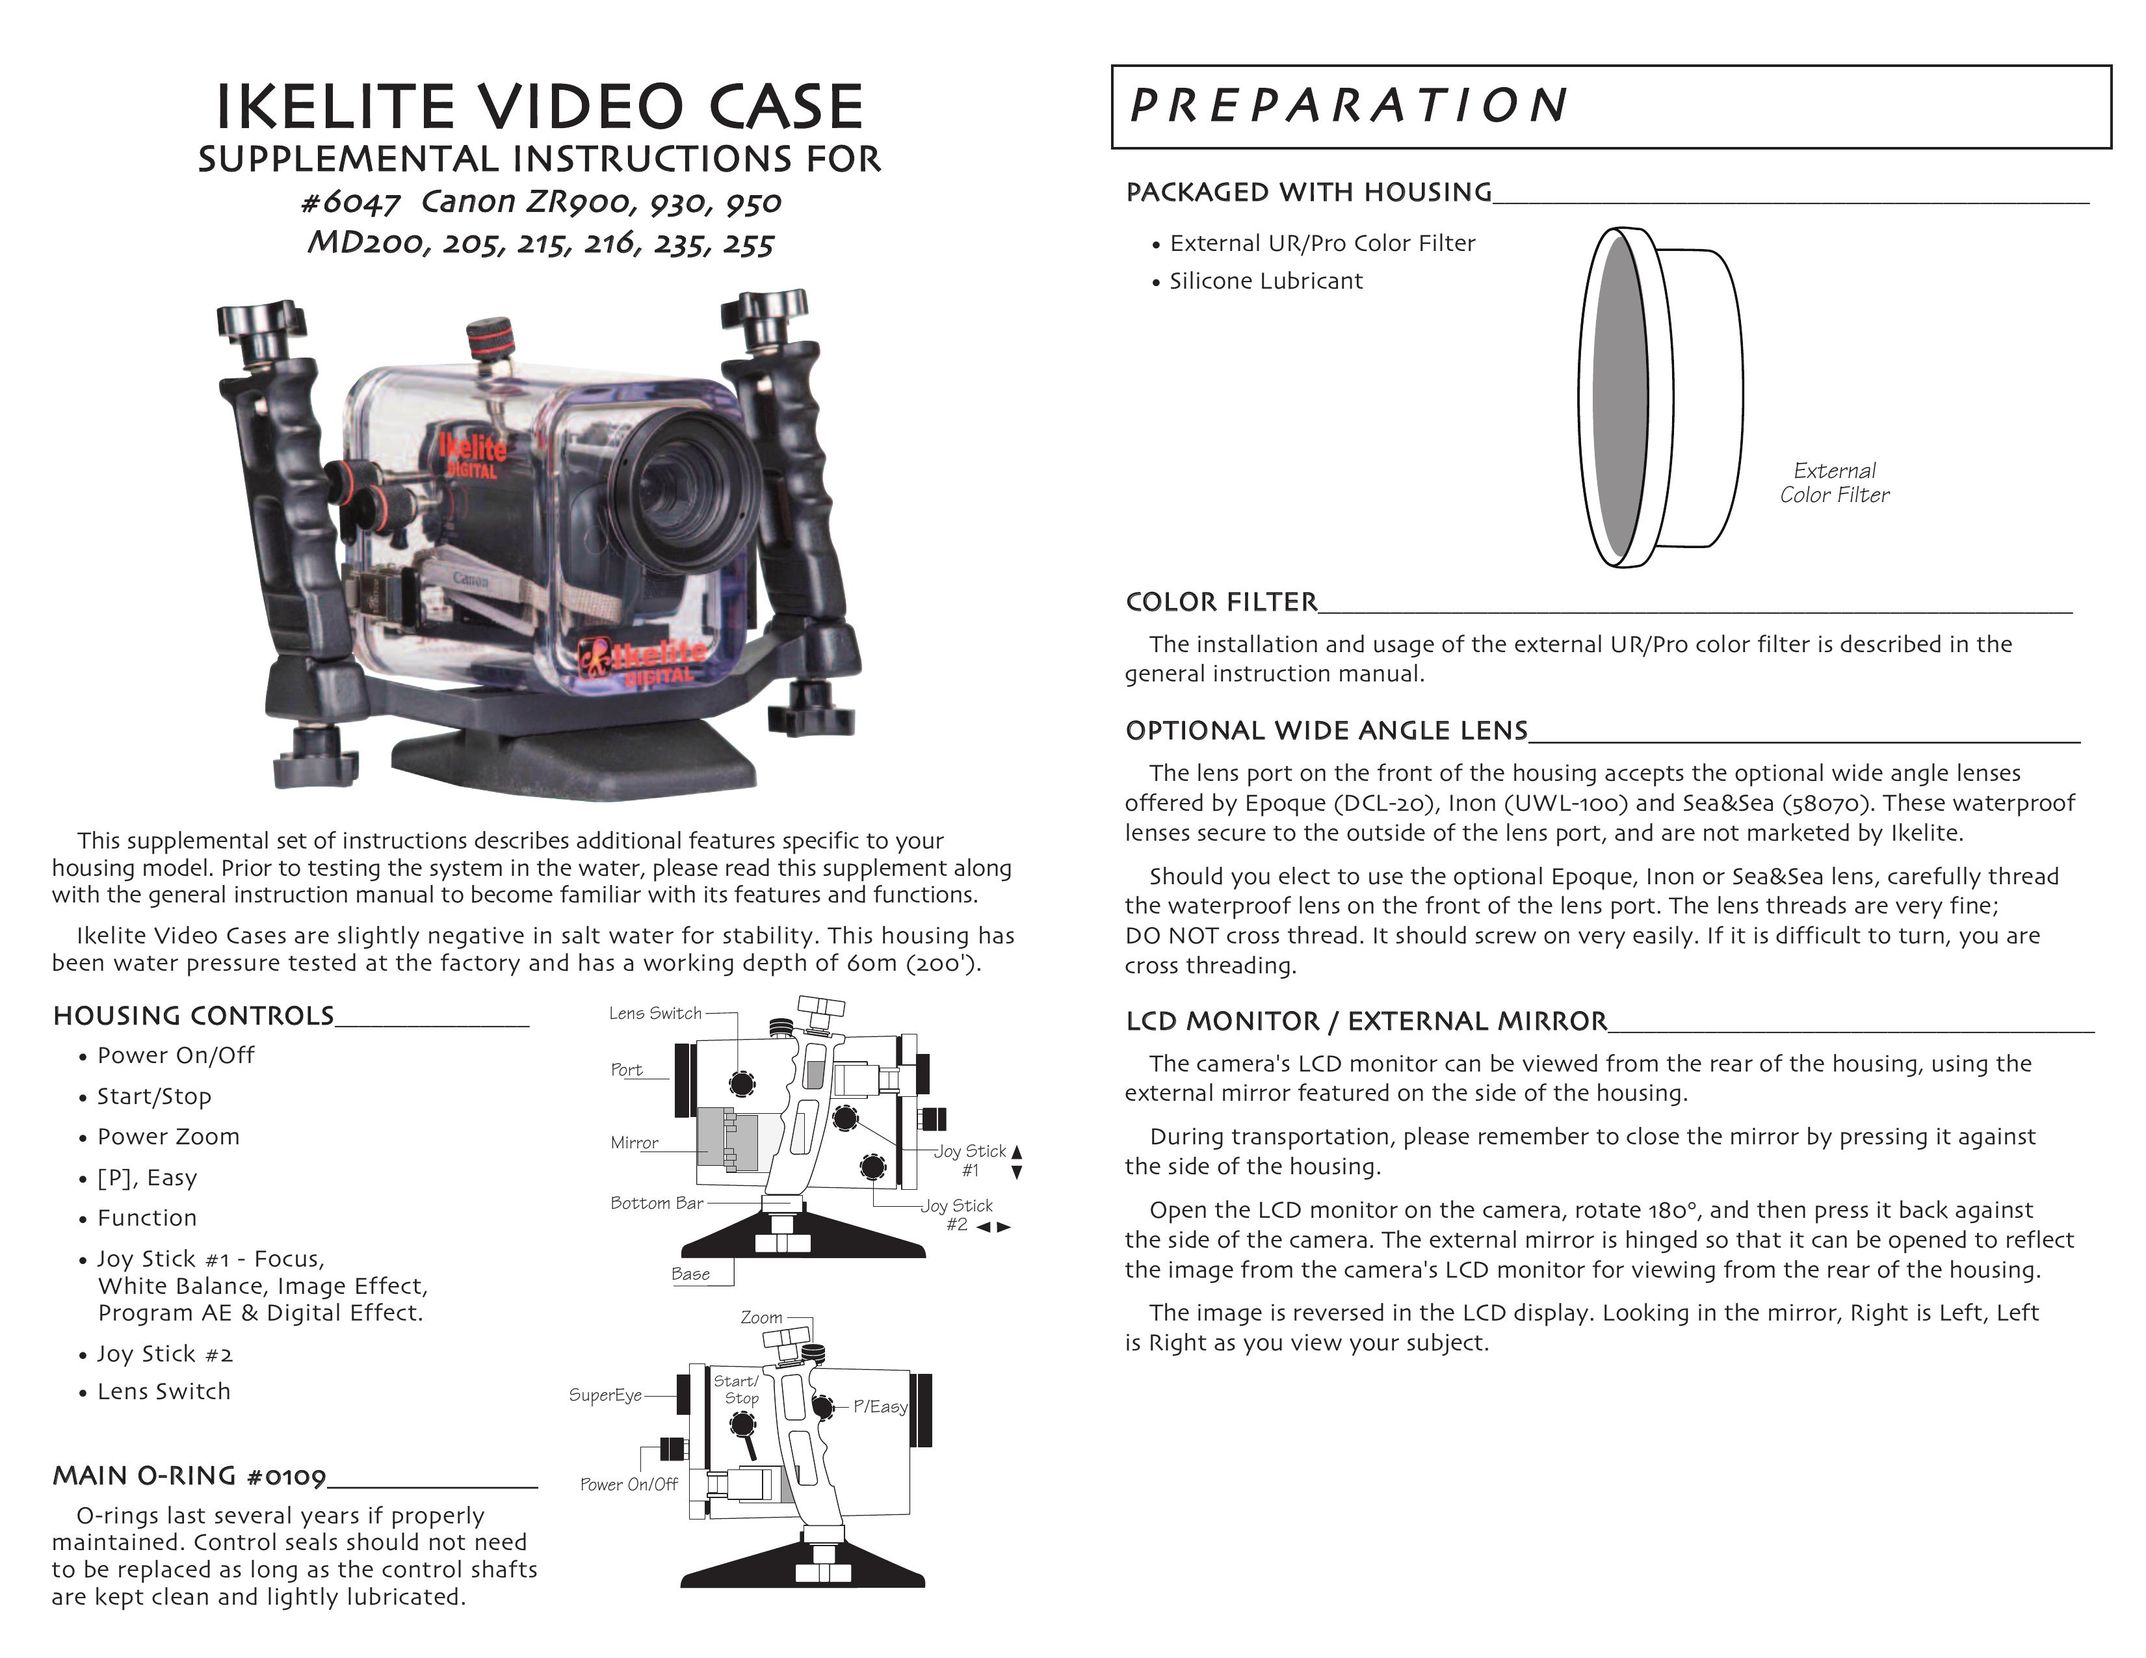 Ikelite MD205 Carrying Case User Manual